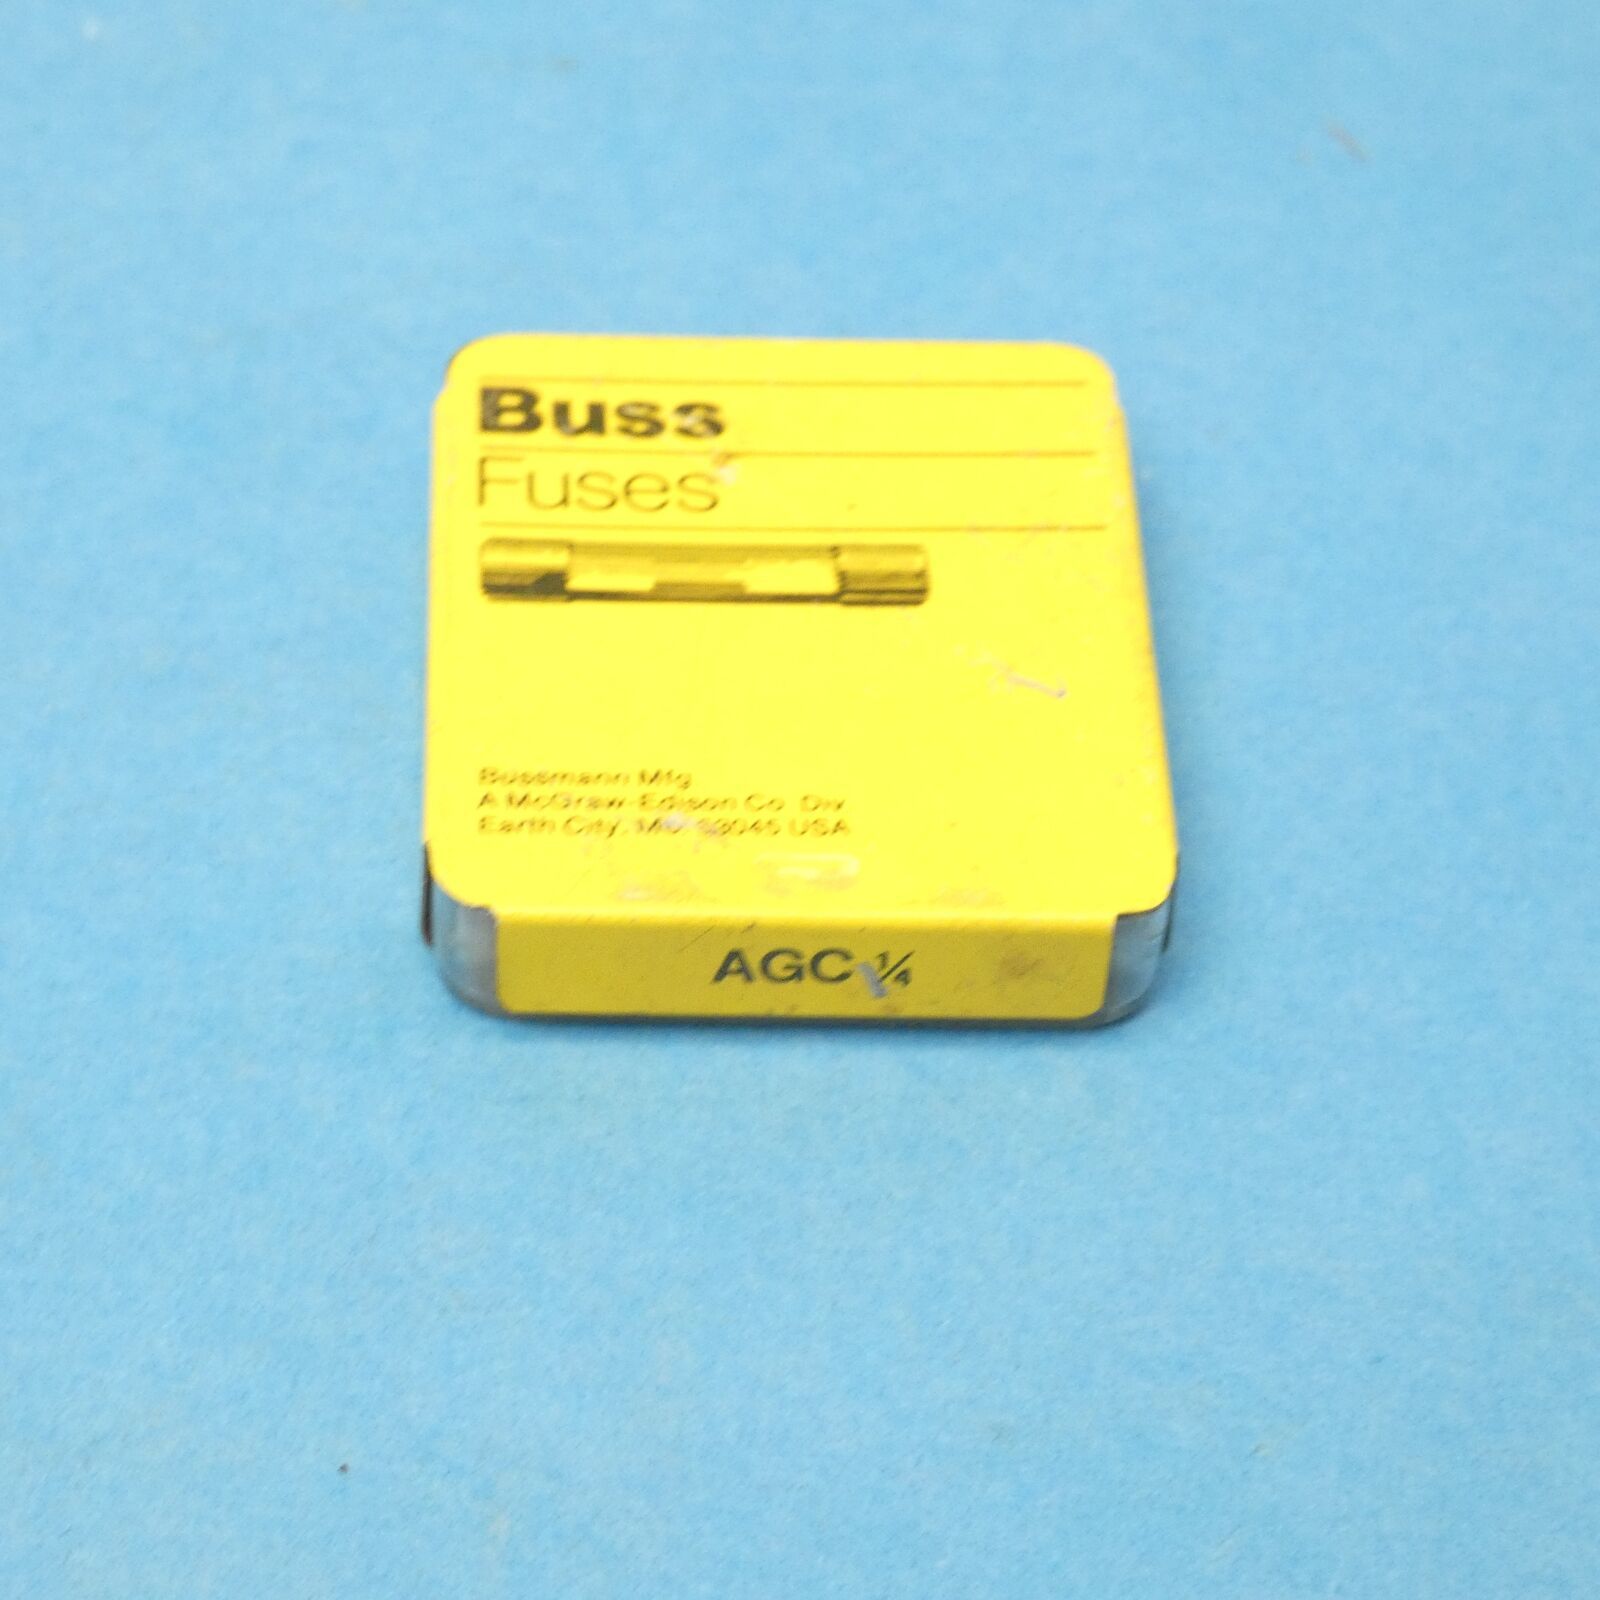 Primary image for Bussmann AGC-1/4 Fast-Acting Glass Fuse 3AG 1/4” x 1-1/4” 1/4 Amp 250 VAC Qty 4